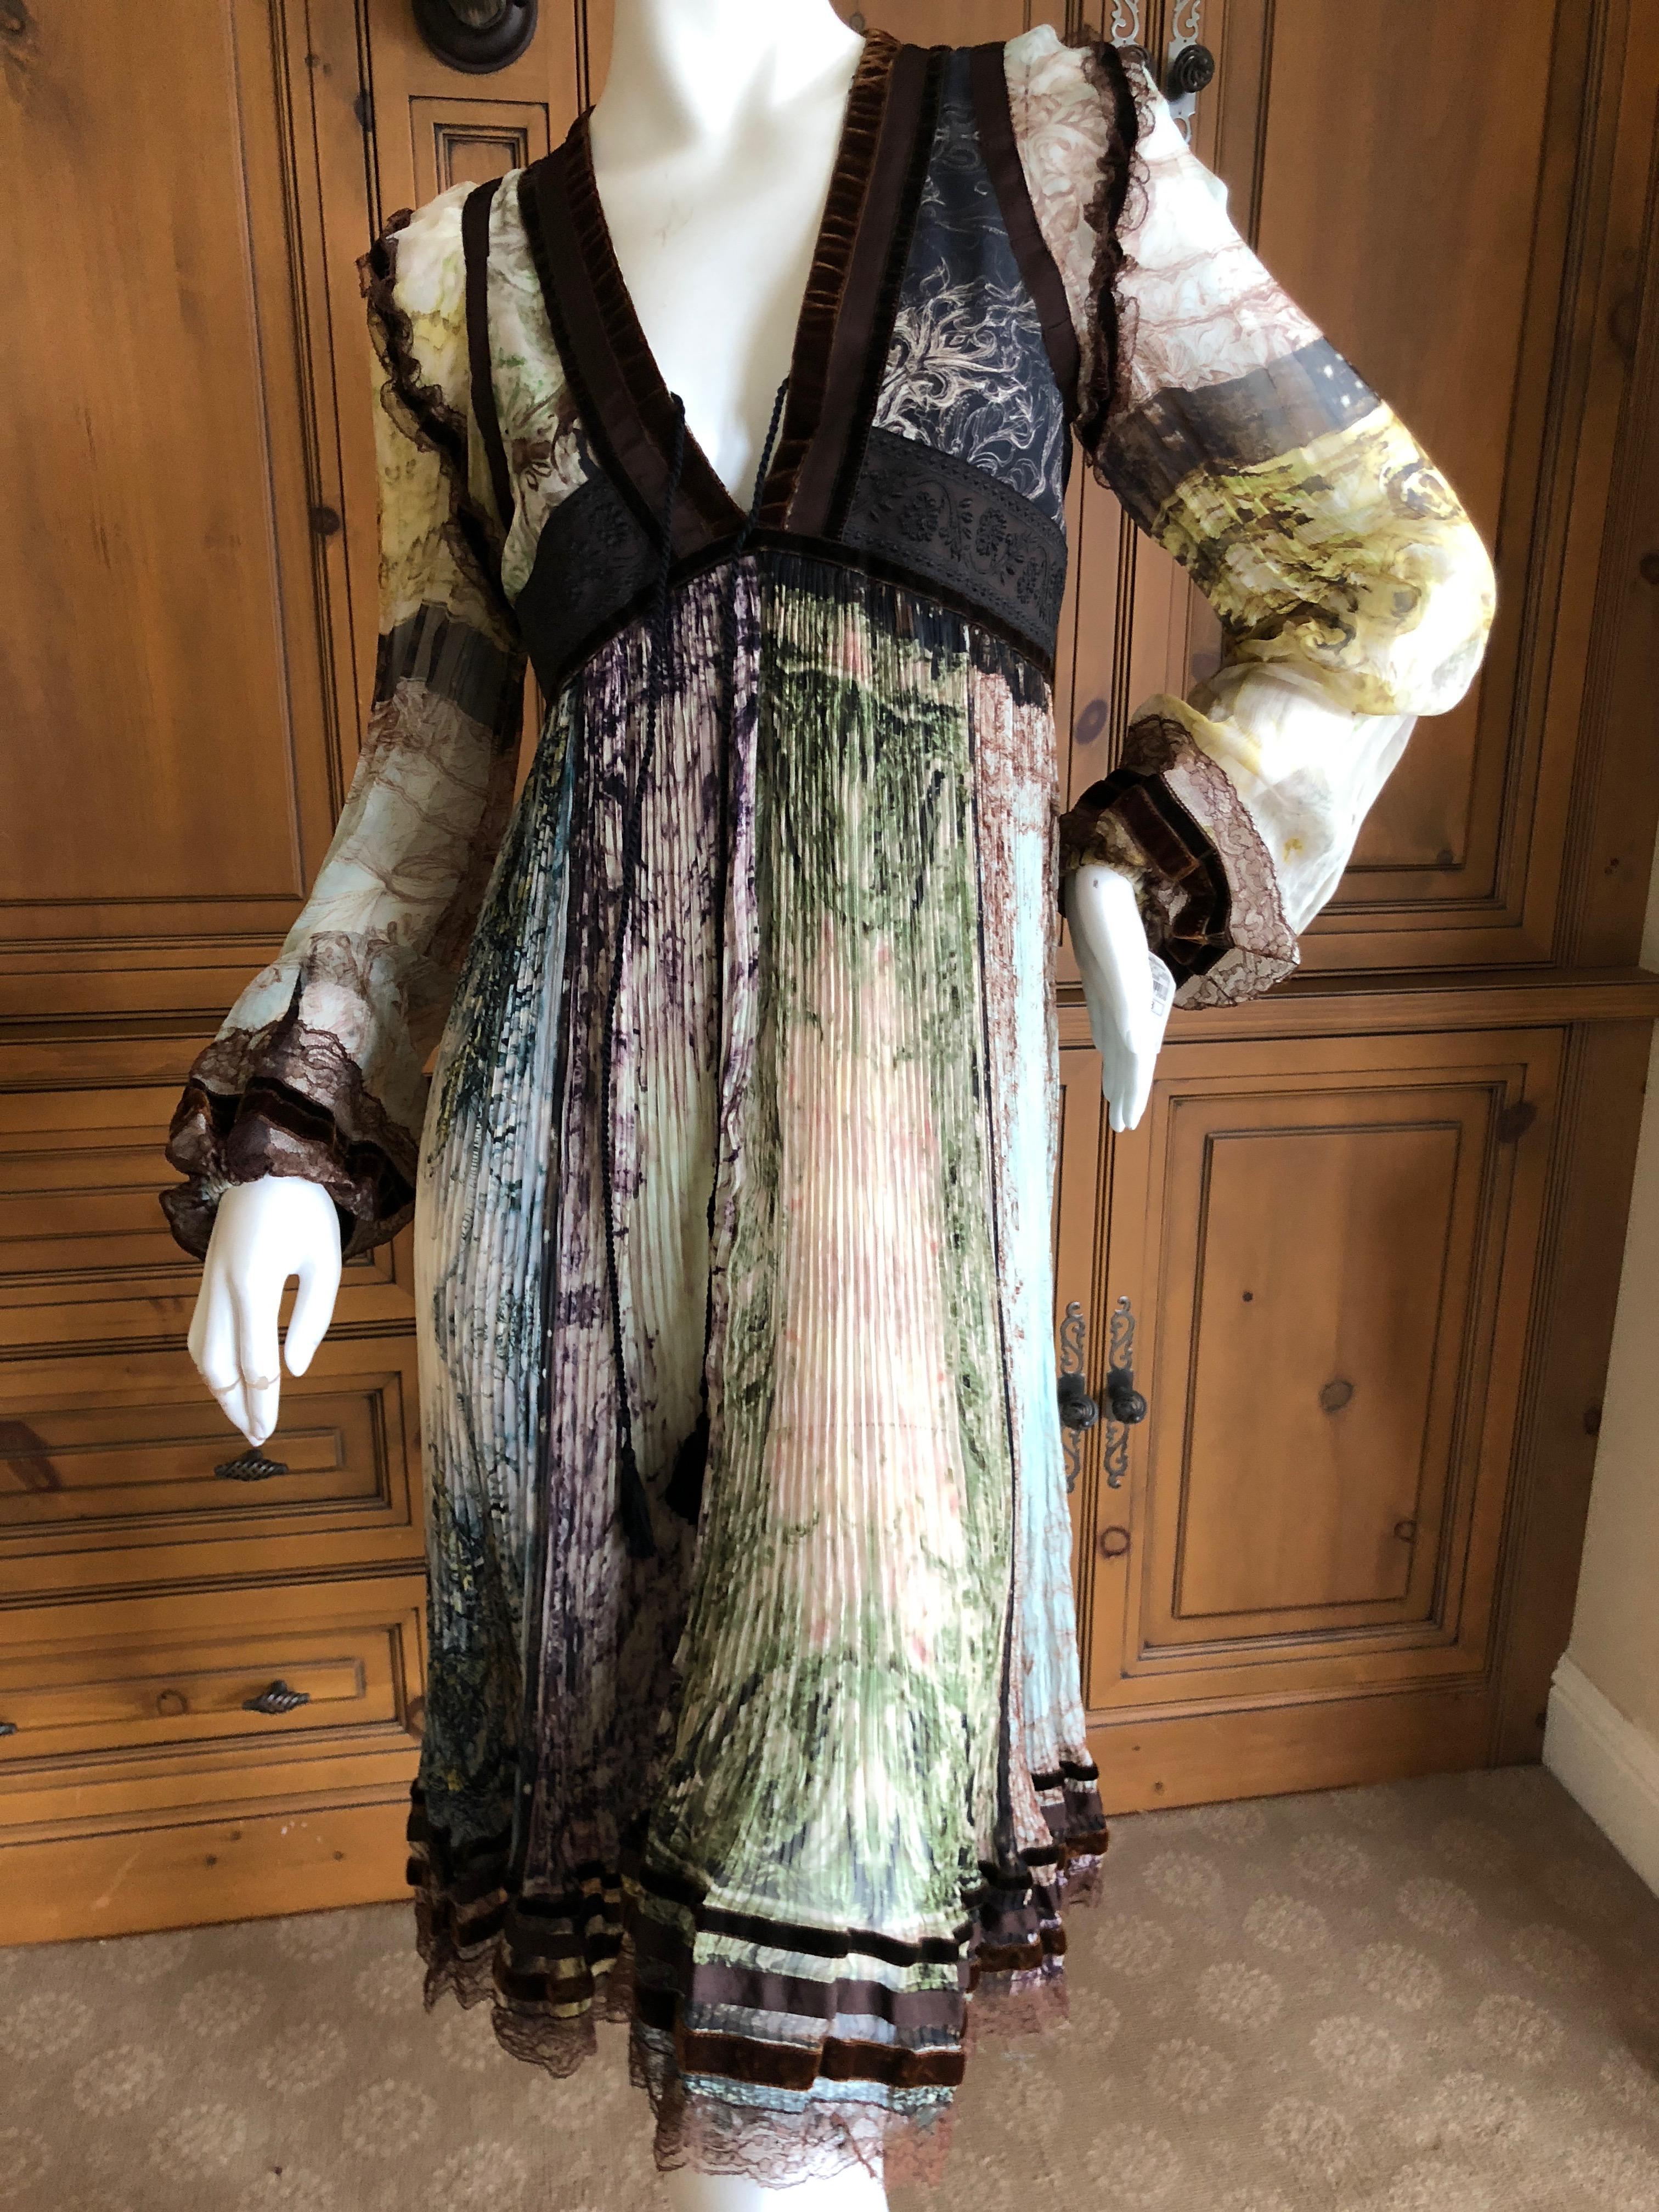 Jean Paul Gaultier Femme Vintage Plisse Pleated Empire Dress with Velvet Trim.
New with tags from Neiman Marcus, retail was $3540

Size 8 US 42 French

Bust 36